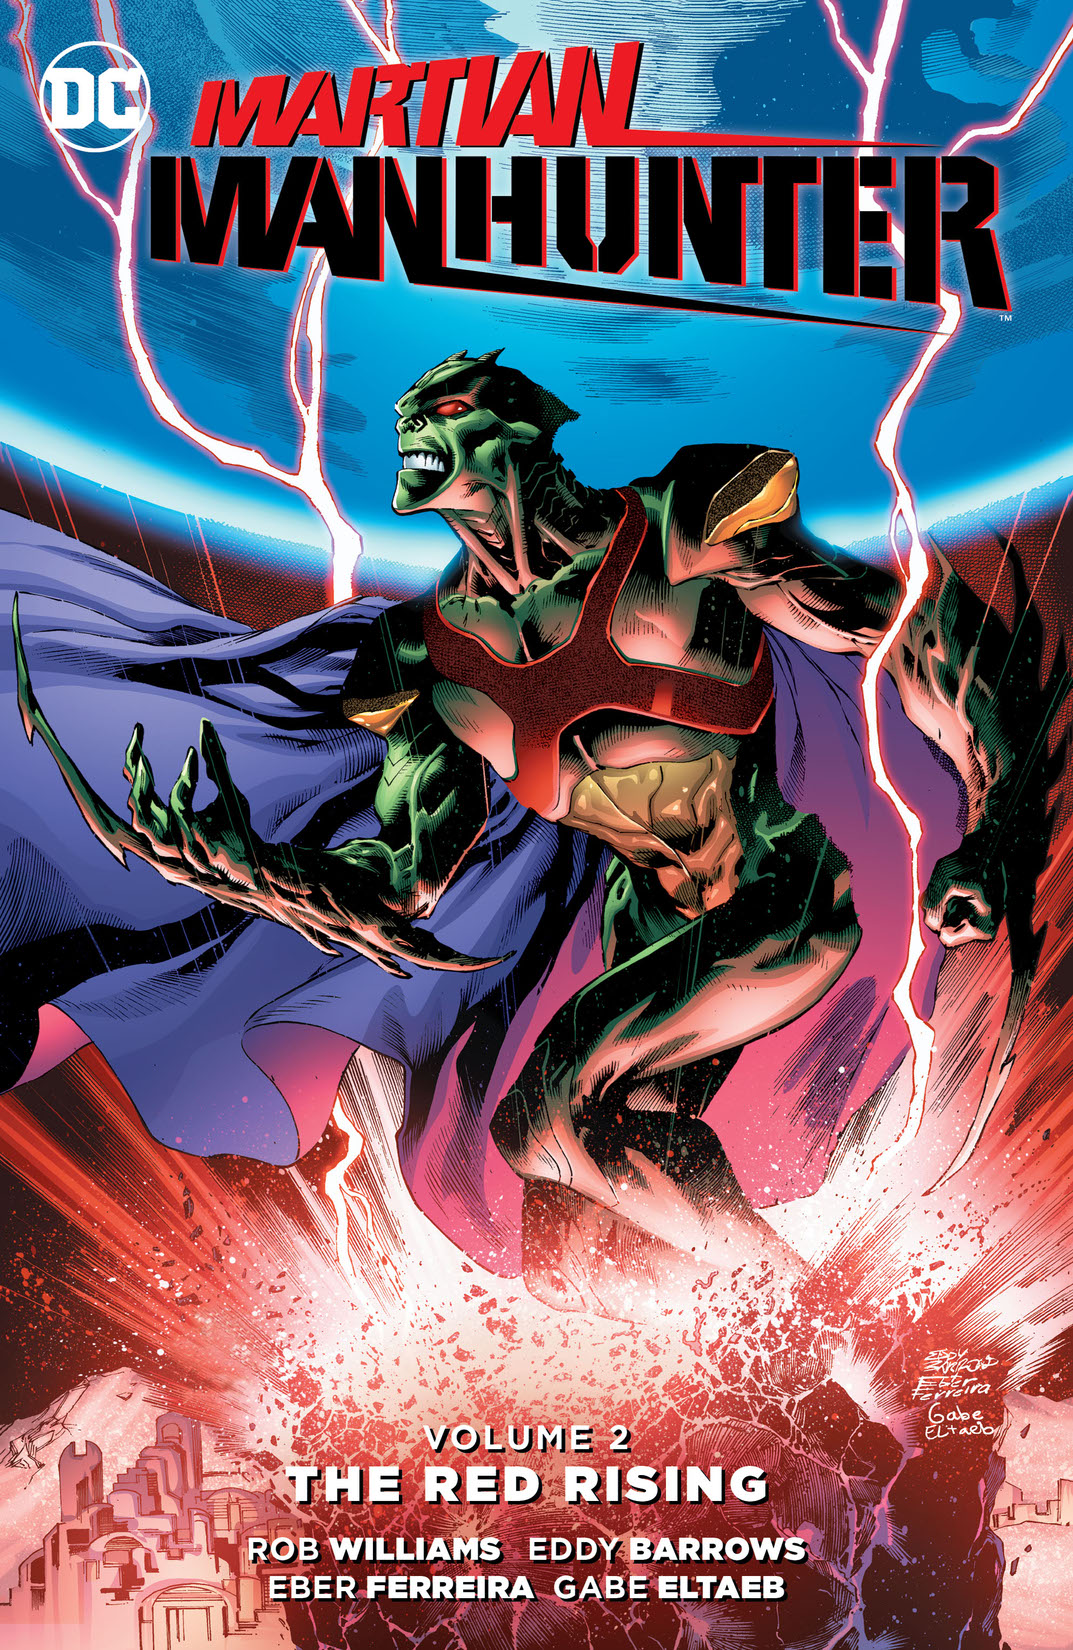 Martian Manhunter Vol. 2: The Red Rising preview images